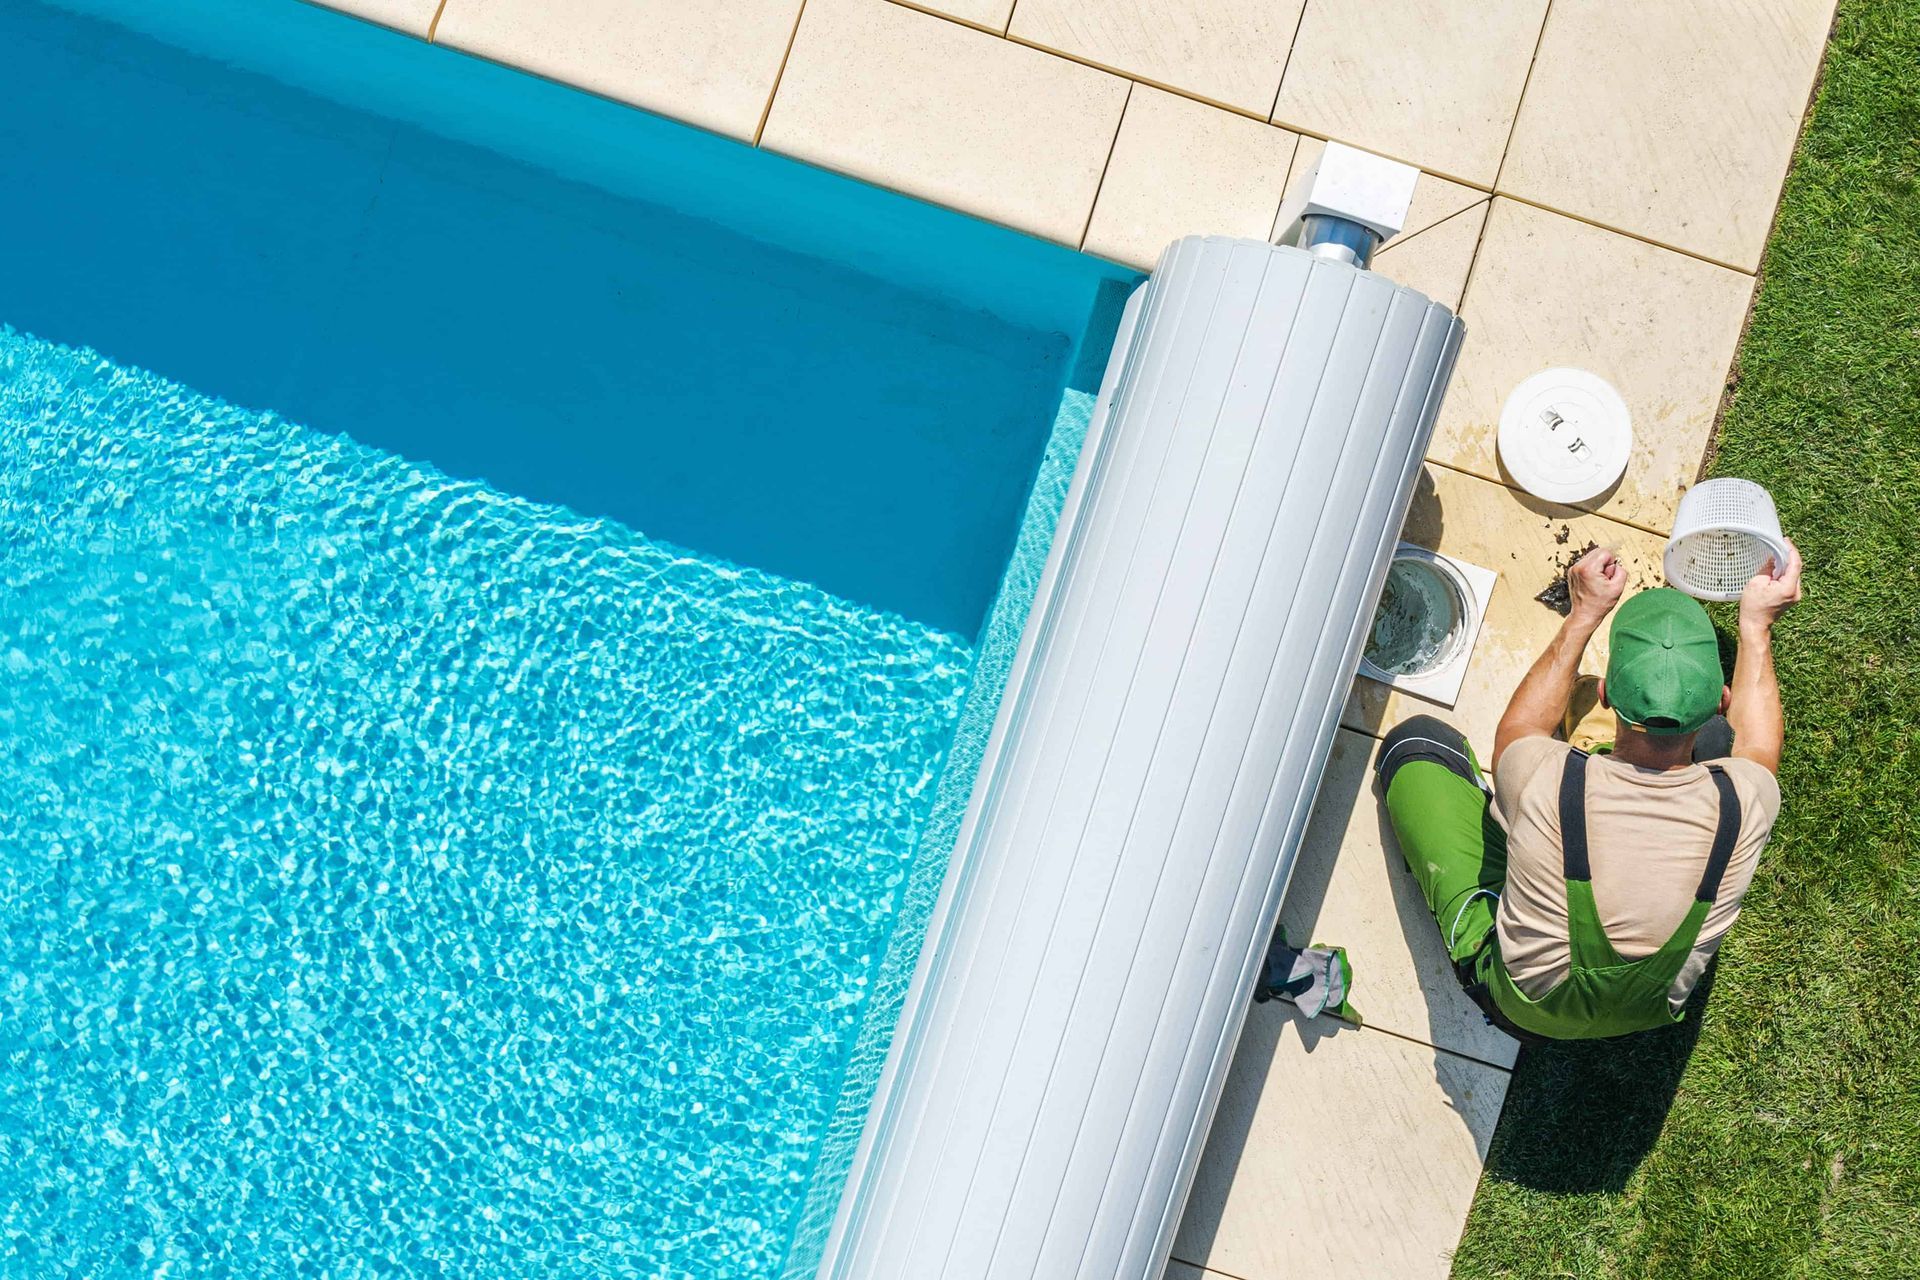 A Garland's Pool Professionals worker on the side of a pool